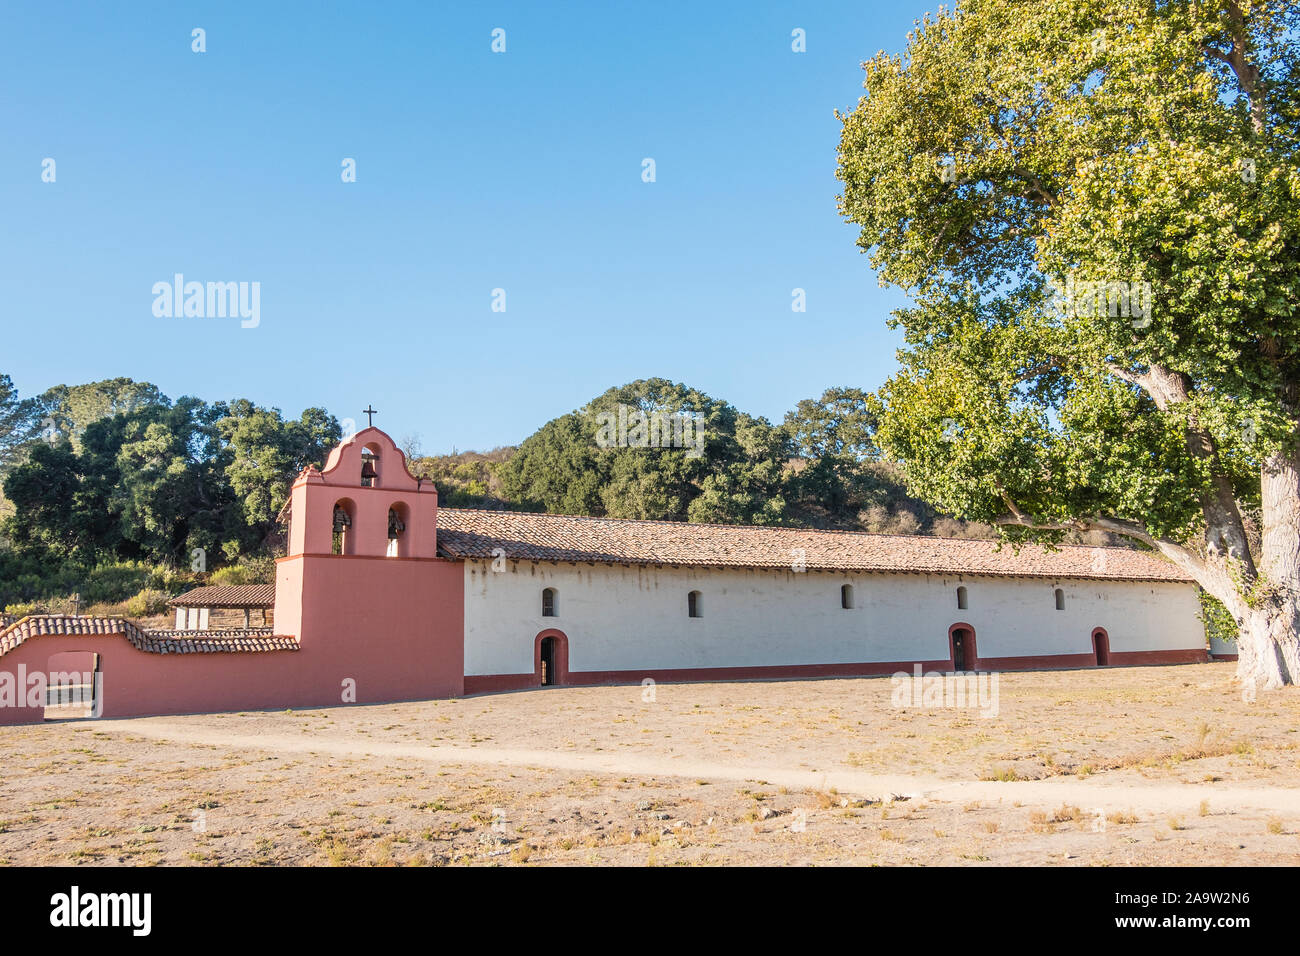 Mission La Purisima Concepción is a Spanish mission in Lompoc, California. It was established on December 8, 1787. Stock Photo